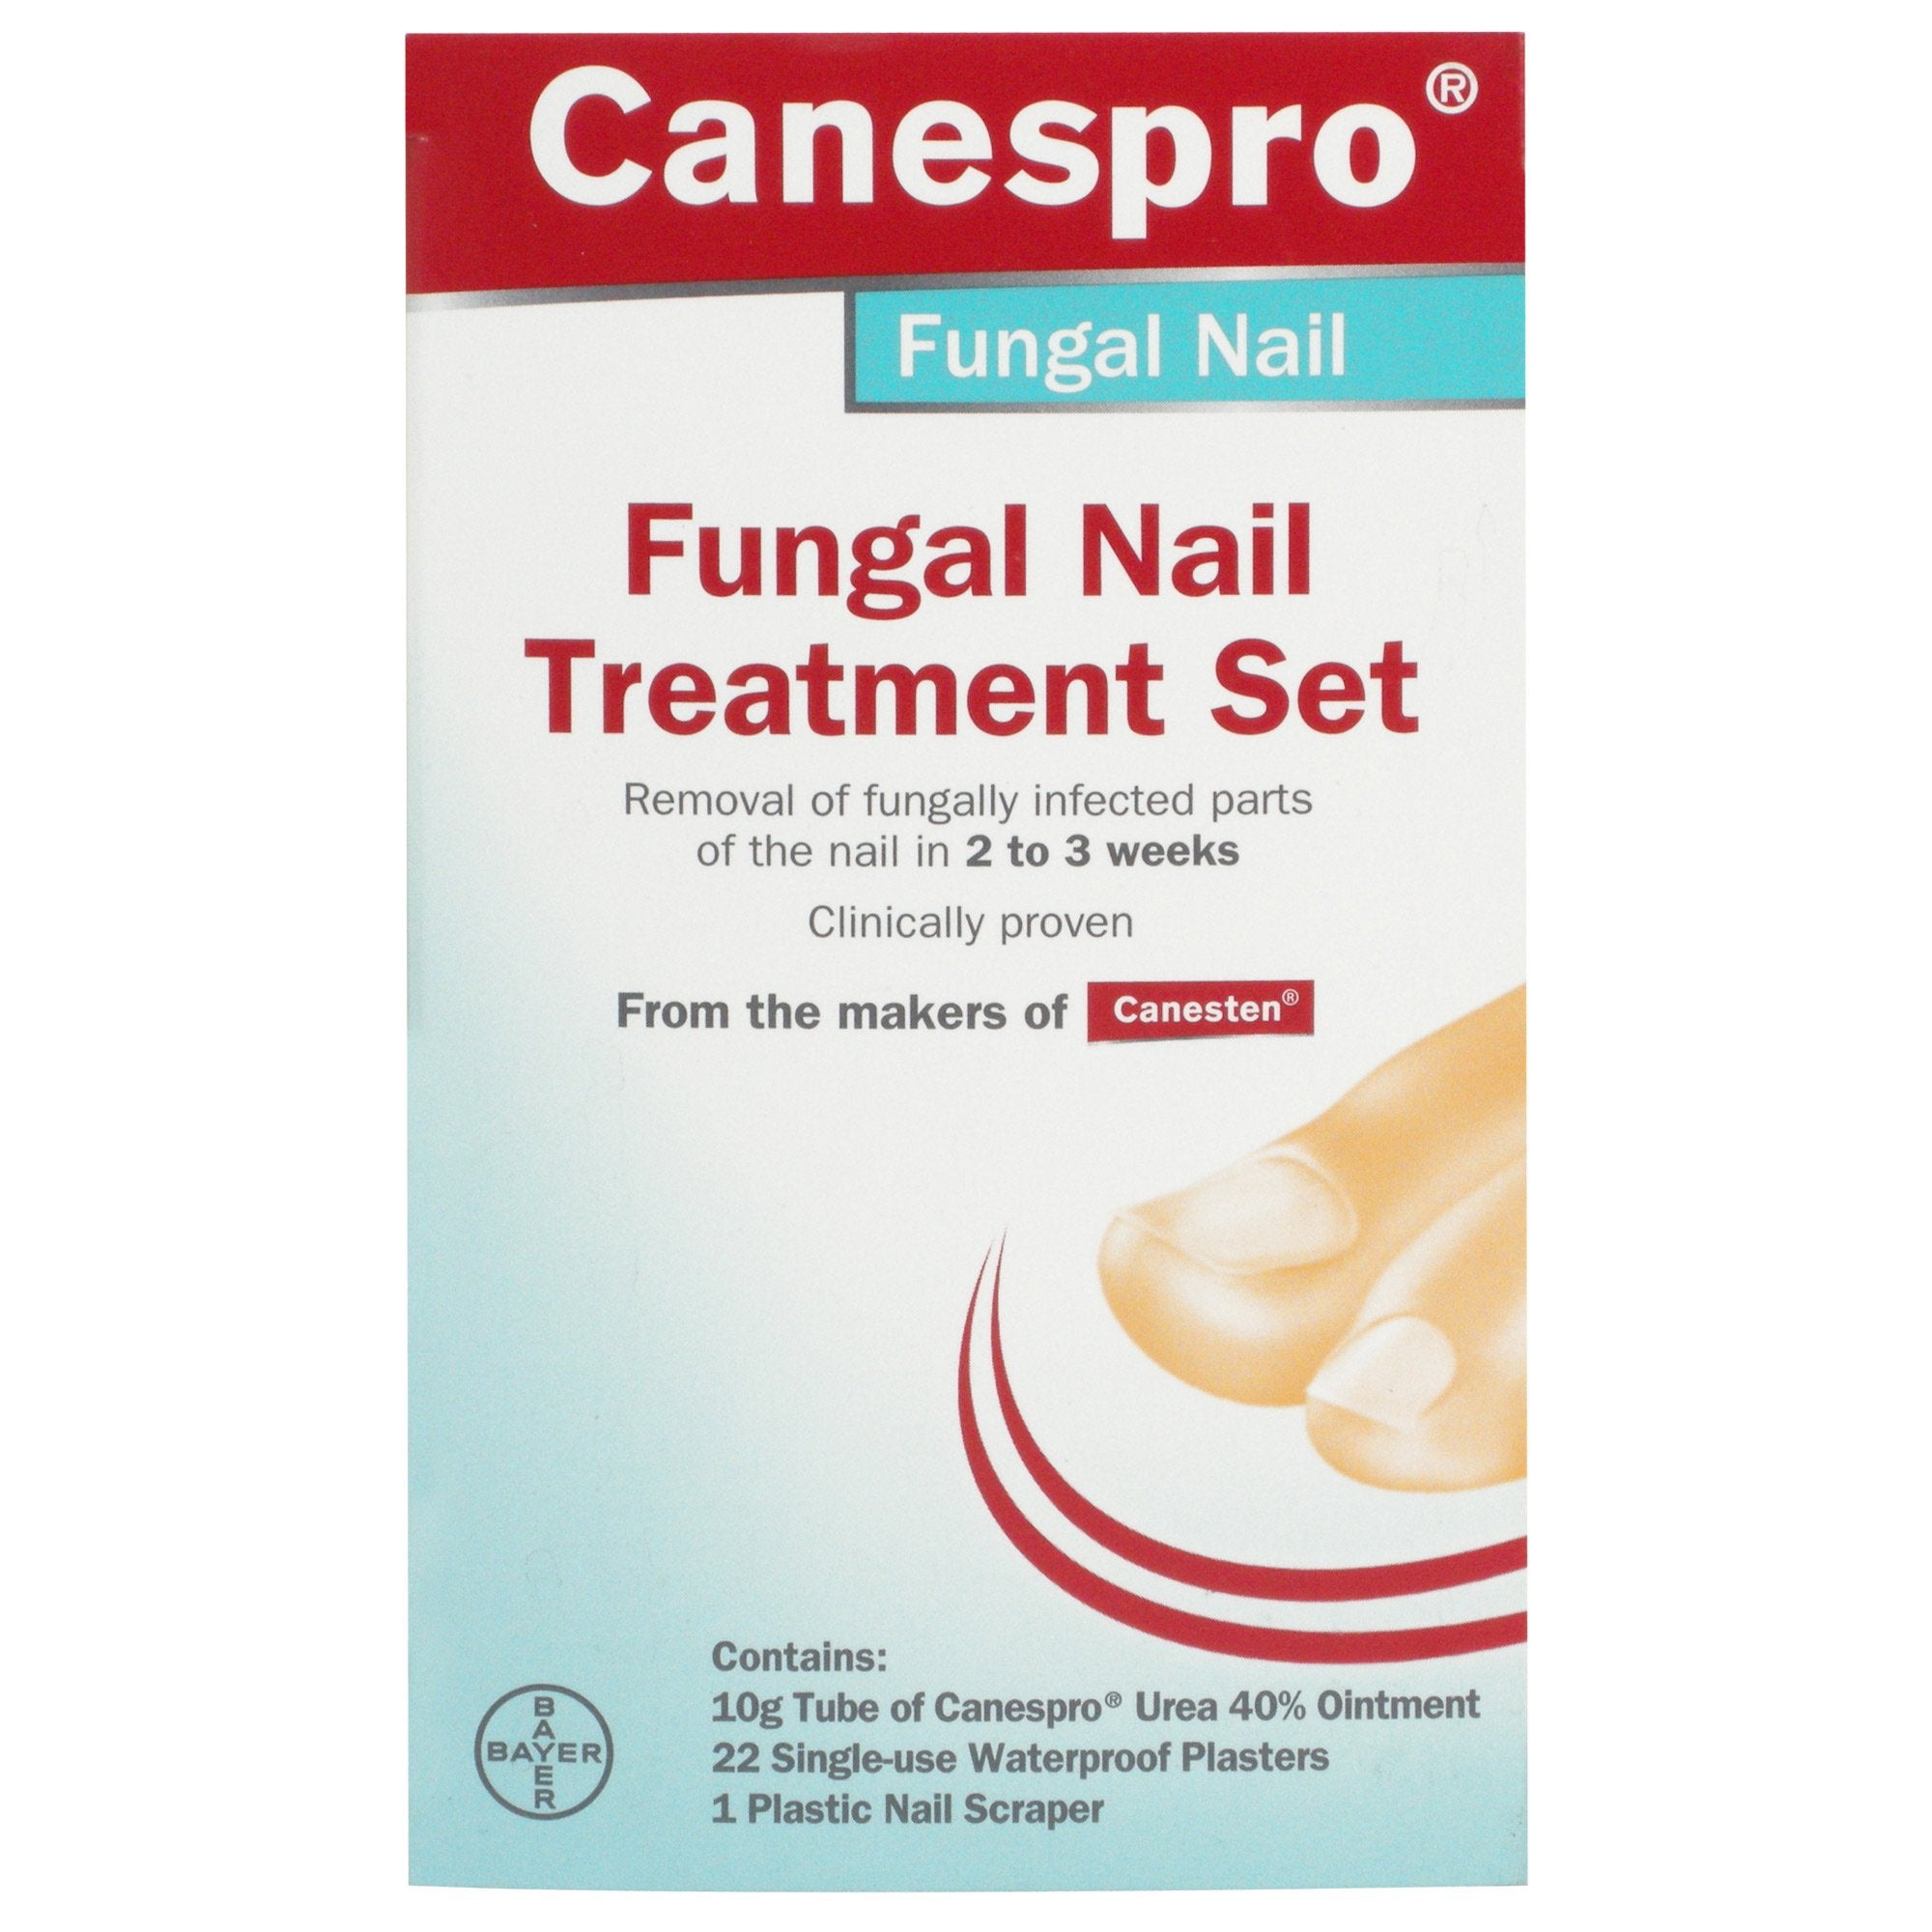 NEW Healthpoint Fungal Nail Treatment, Results in 2 Weeks, Prevents  Re-Infection | eBay